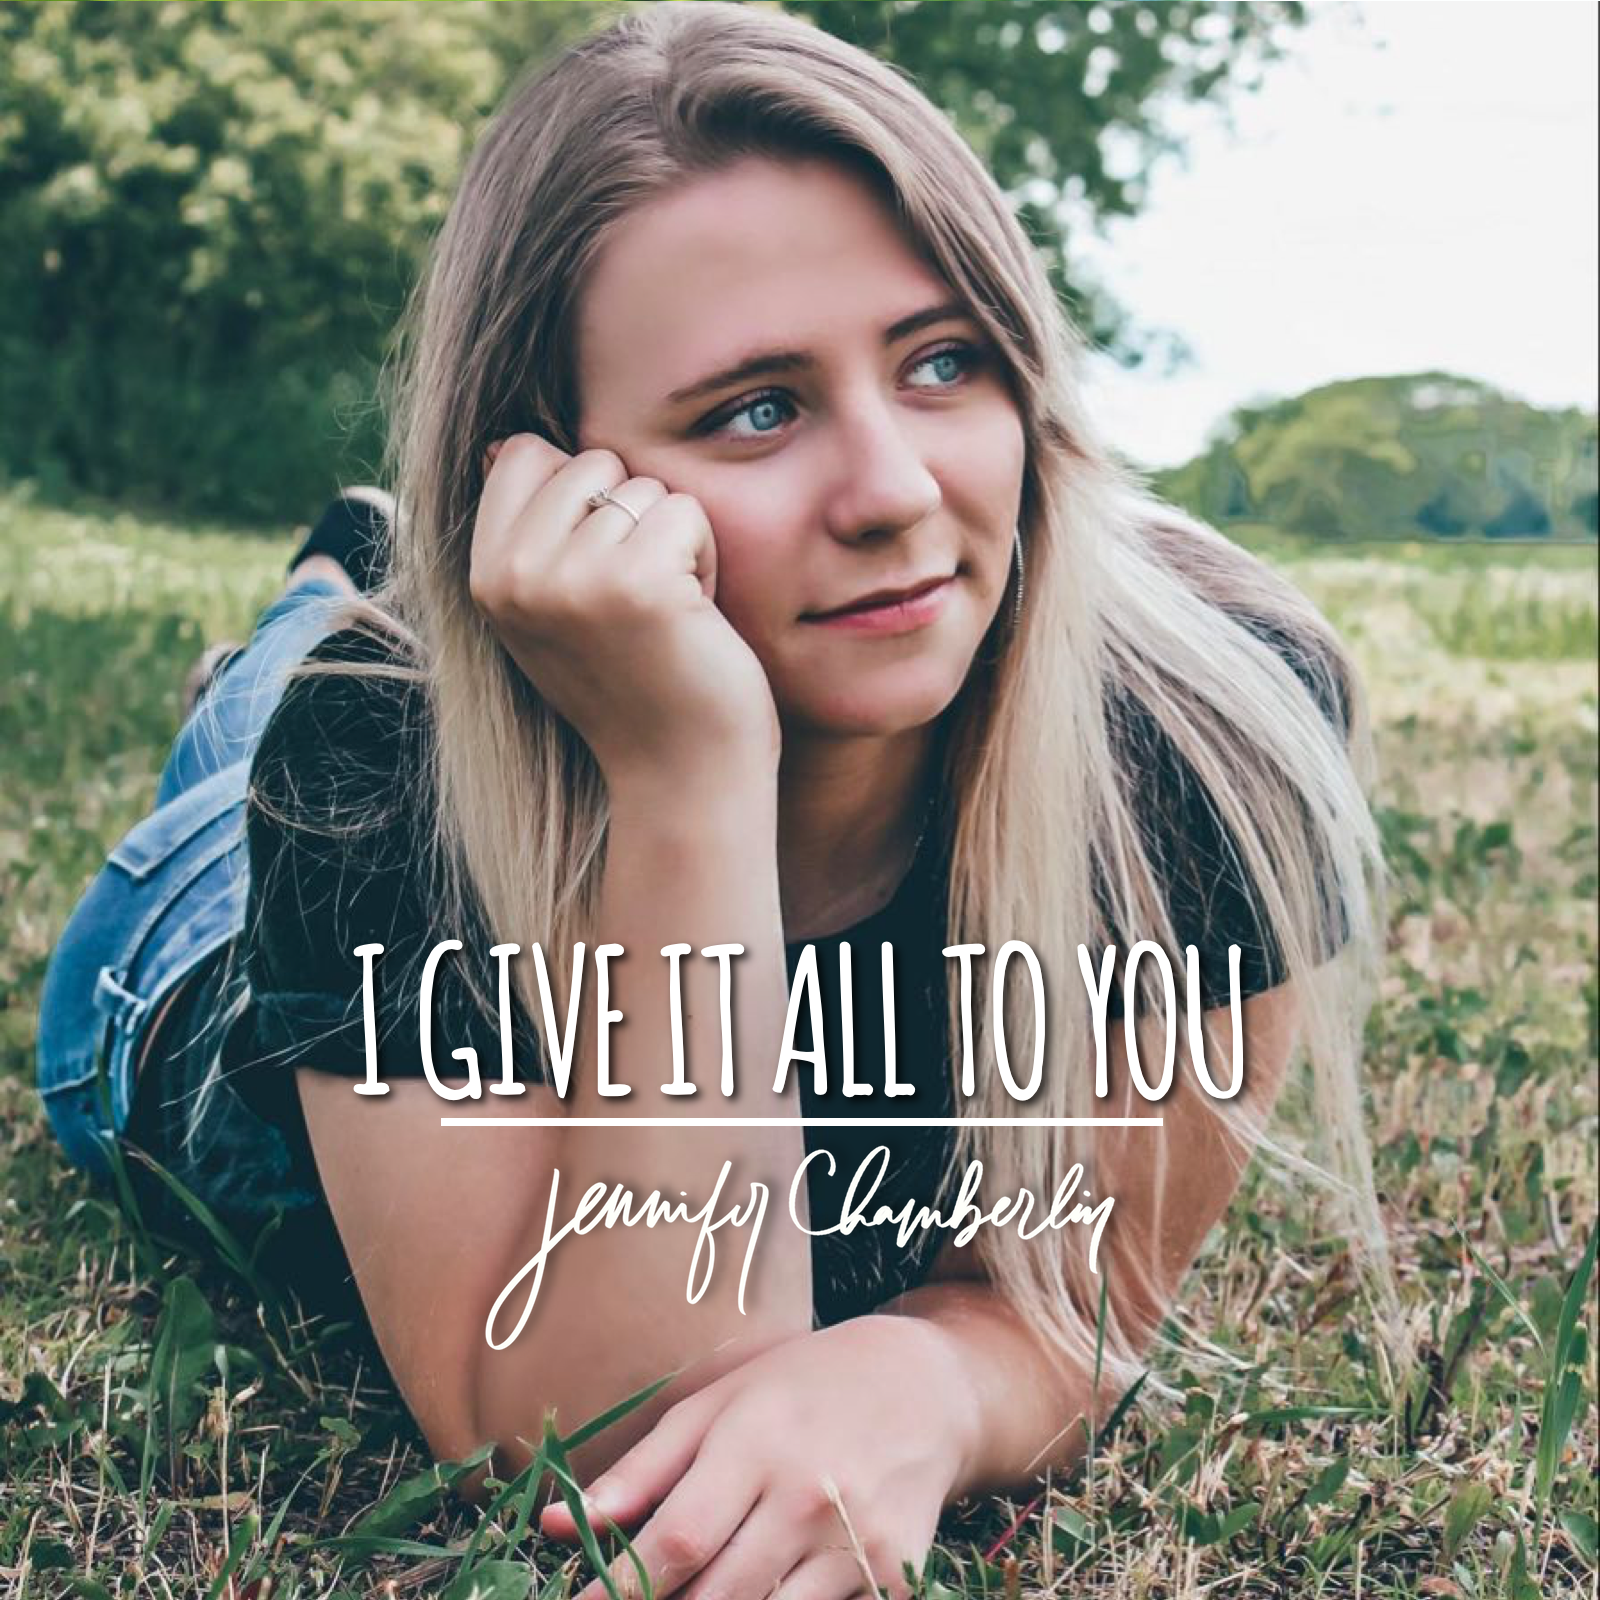 Art for I GIVE IT ALL TO YOU  by Jennifer Chamberlin